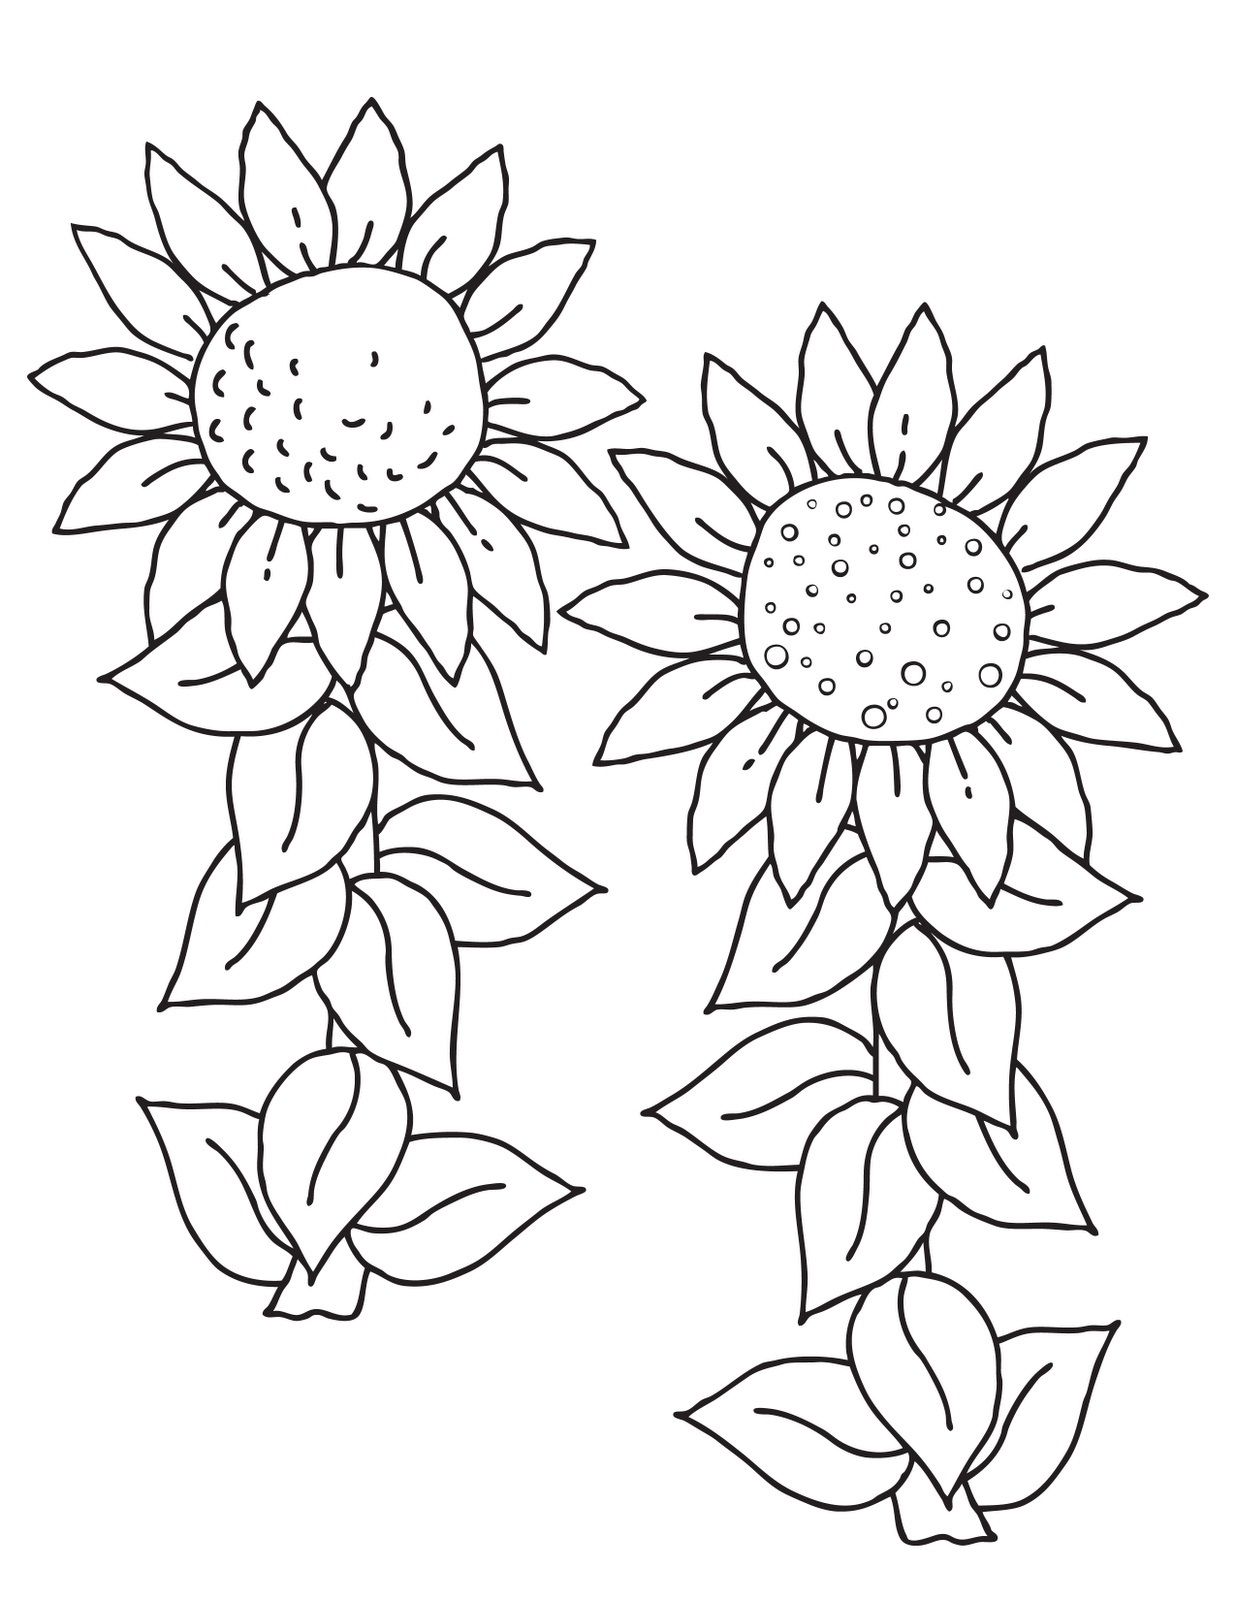 printable-realistic-sunflower-coloring-page-and-as-we-often-enjoy